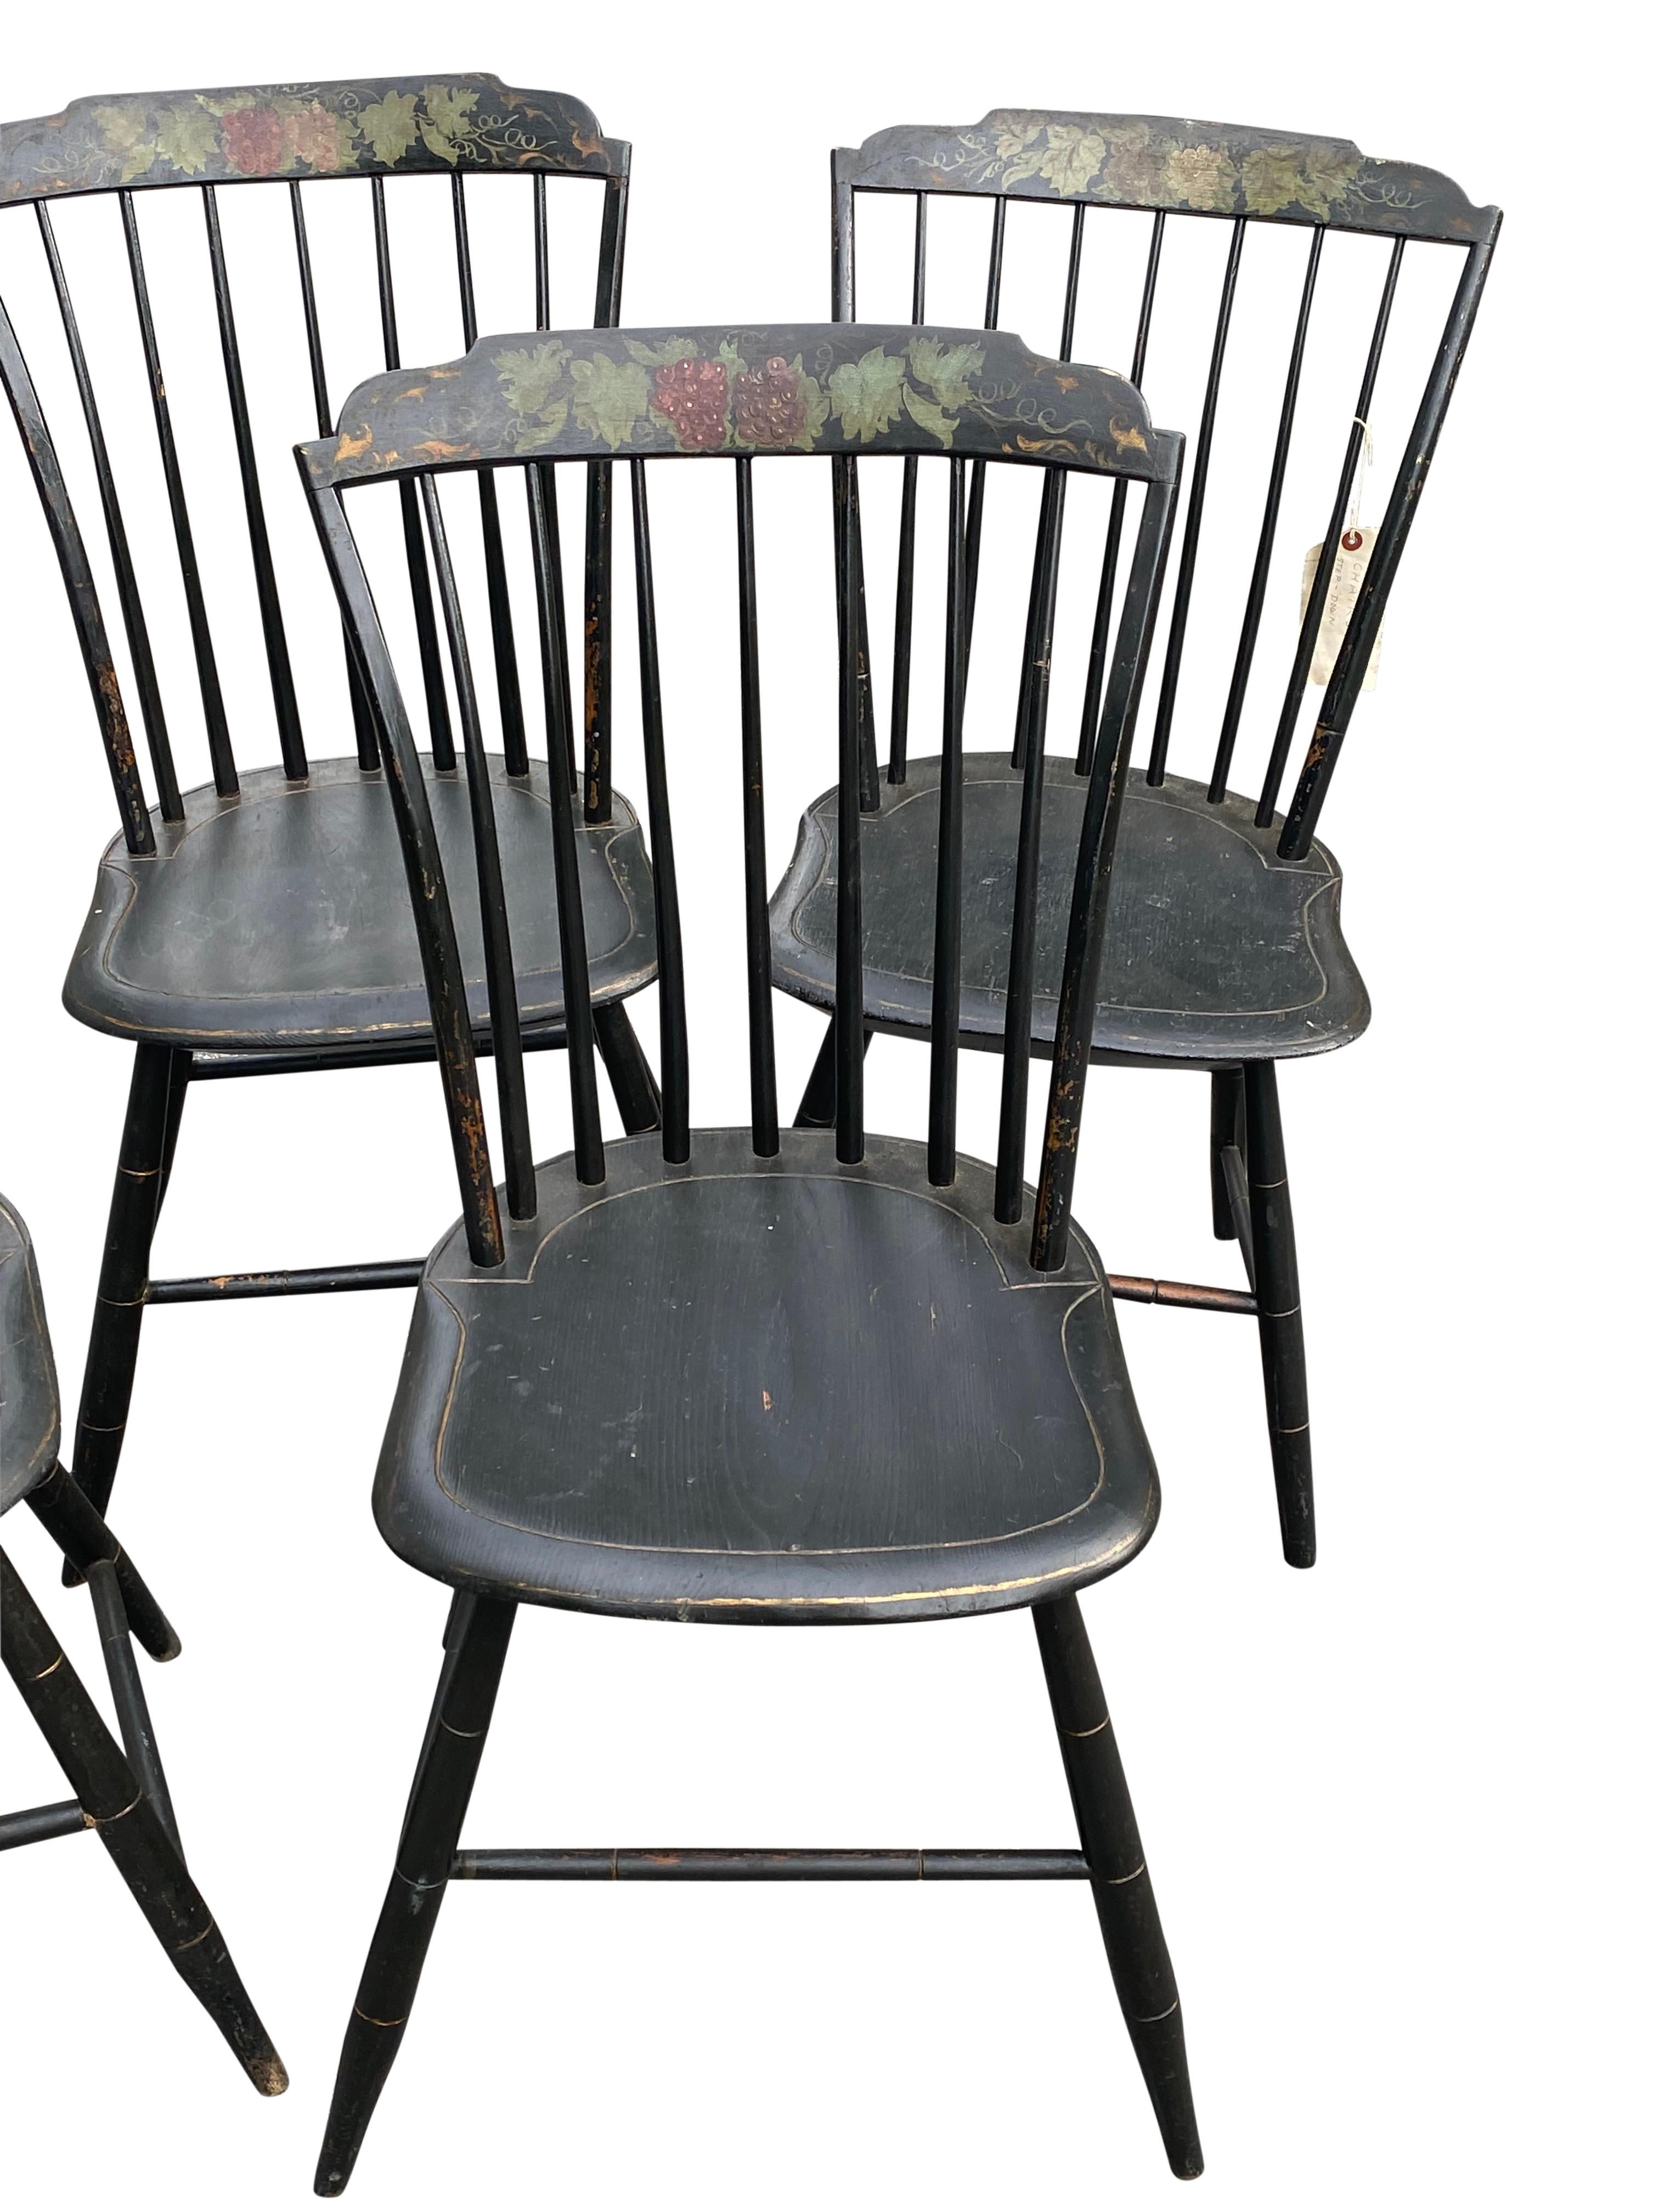 19th Century Set of Four American Antique Windsor Step-Down Chairs Maker's Stamp circa 1815